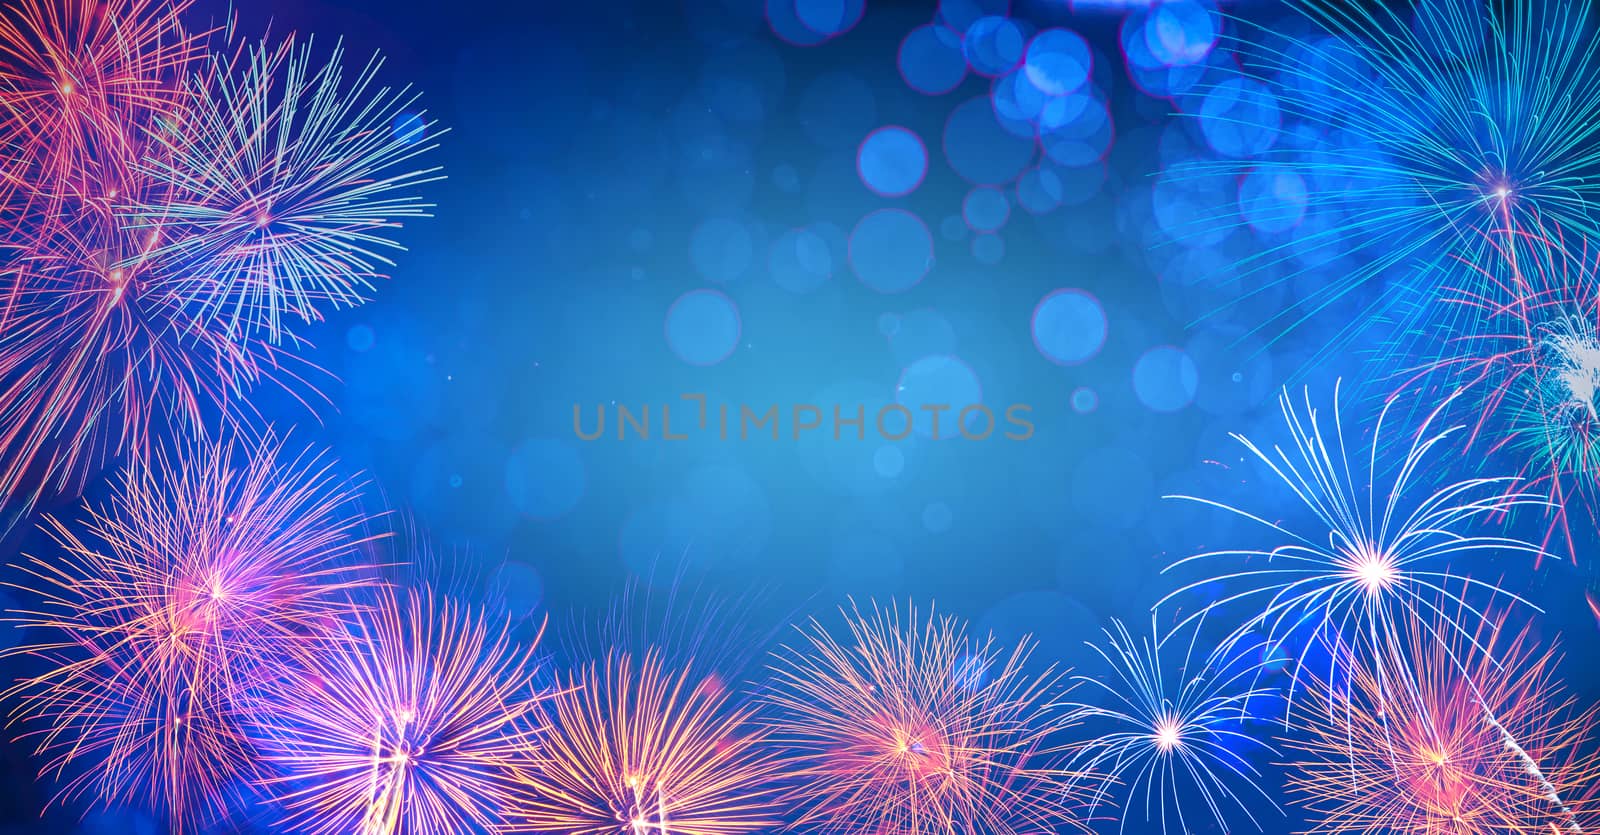 Abstract  Background With Fireworks.Background of new years day by sarayut_thaneerat